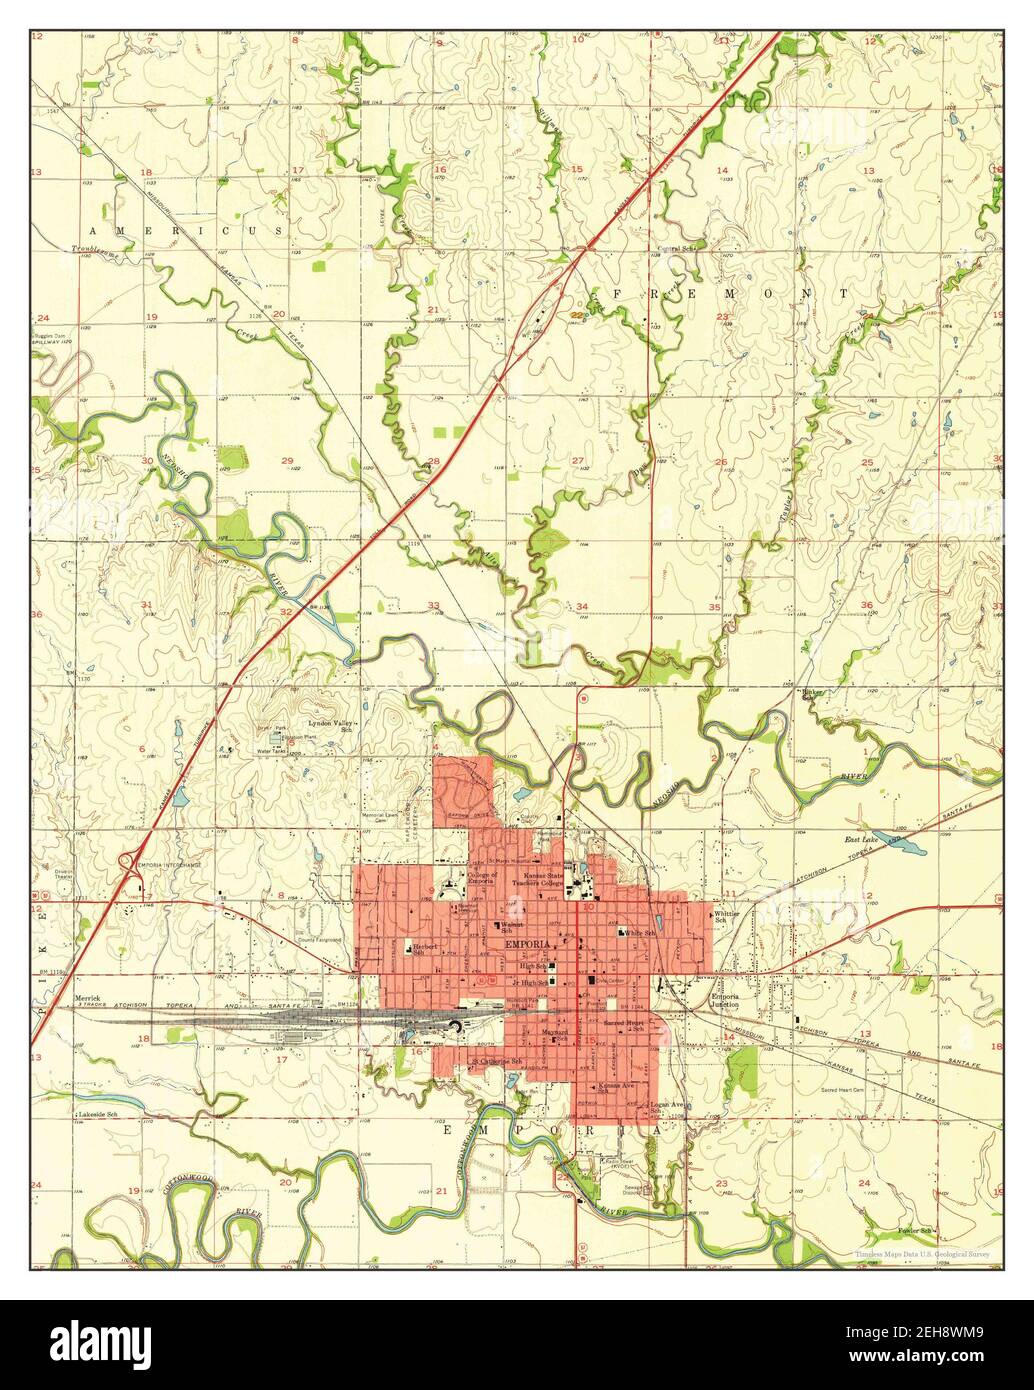 Emporia Kansas Map 1957 124000 United States Of America By Timeless Maps Data Us Geological Survey 2EH8WM9 